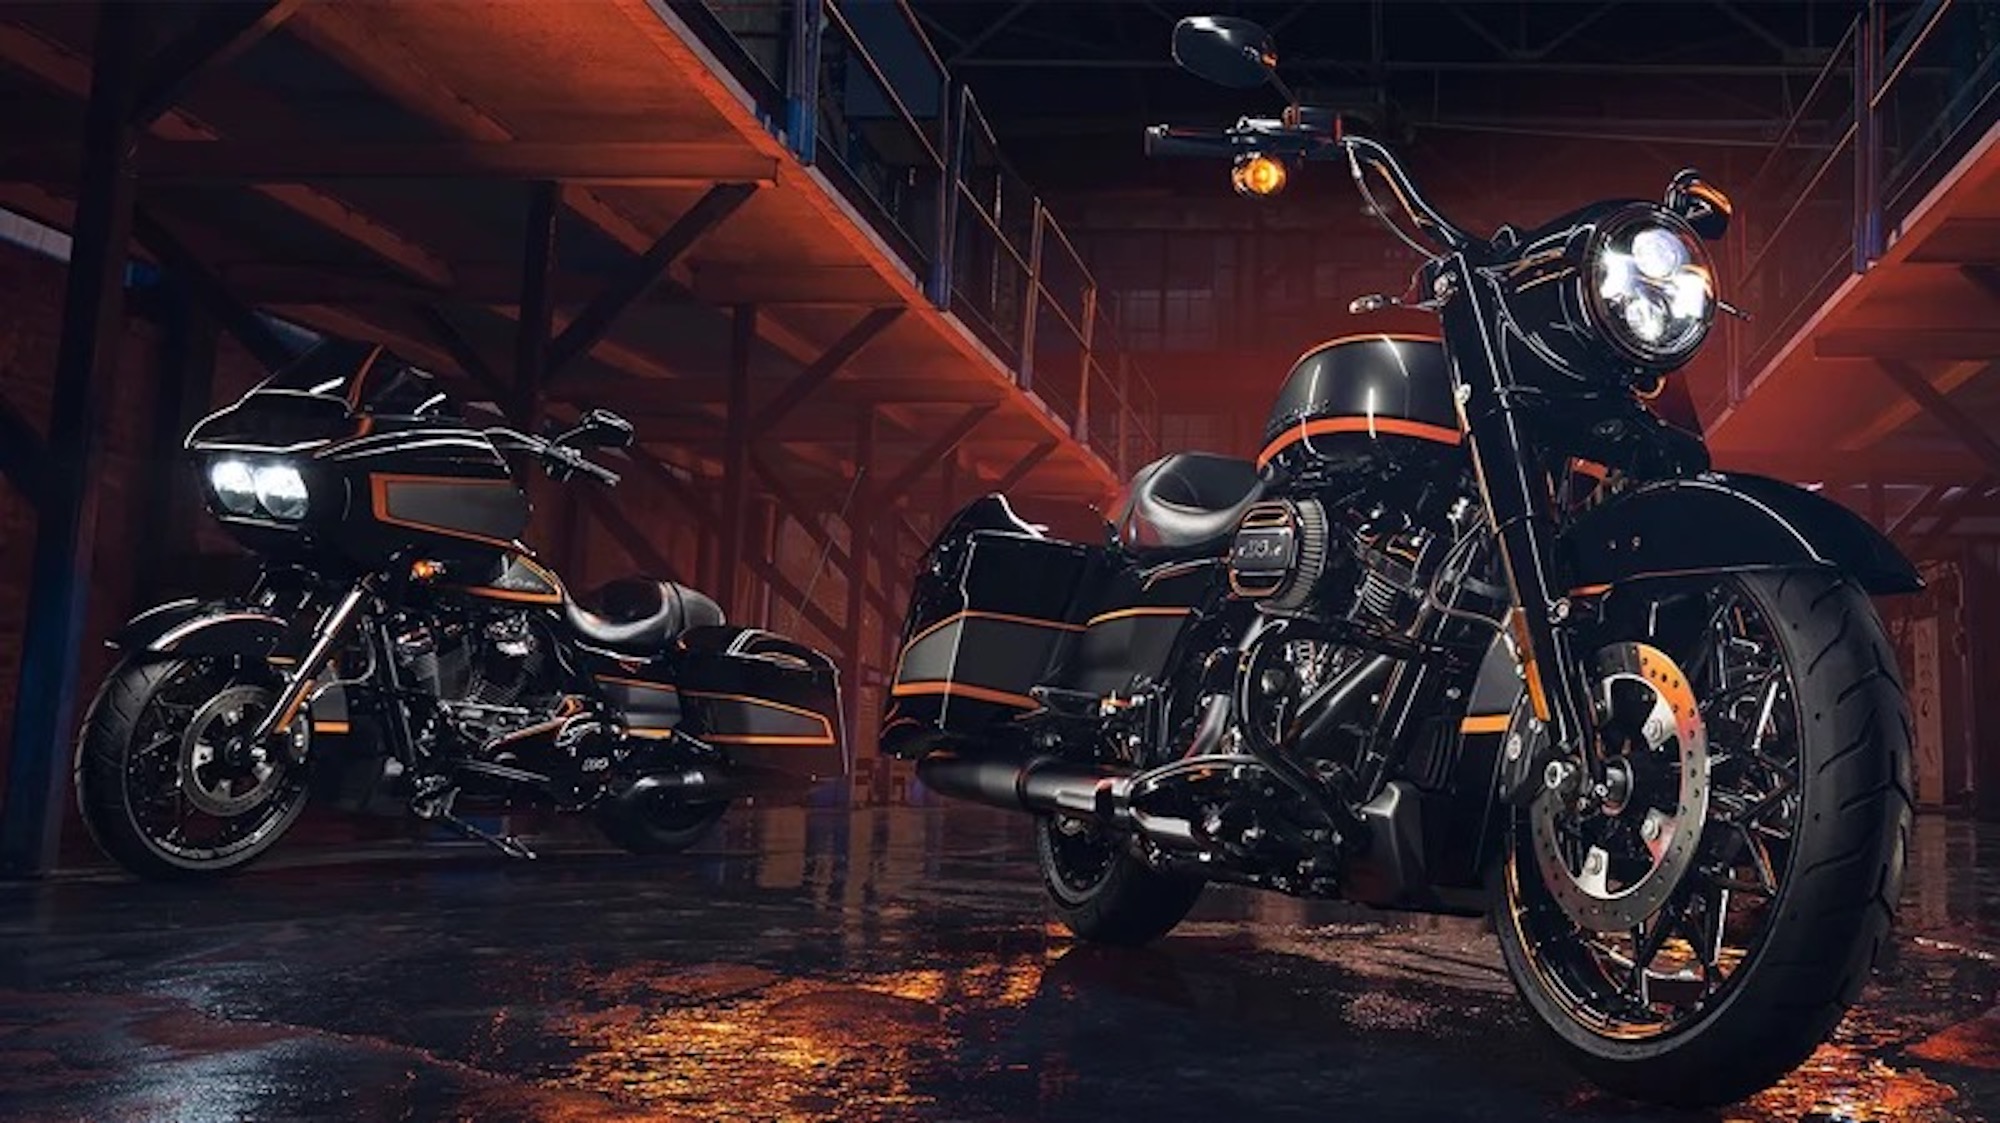 Harley's Factory Apex Custom Paint. Media sourced from Harley-Davidson.